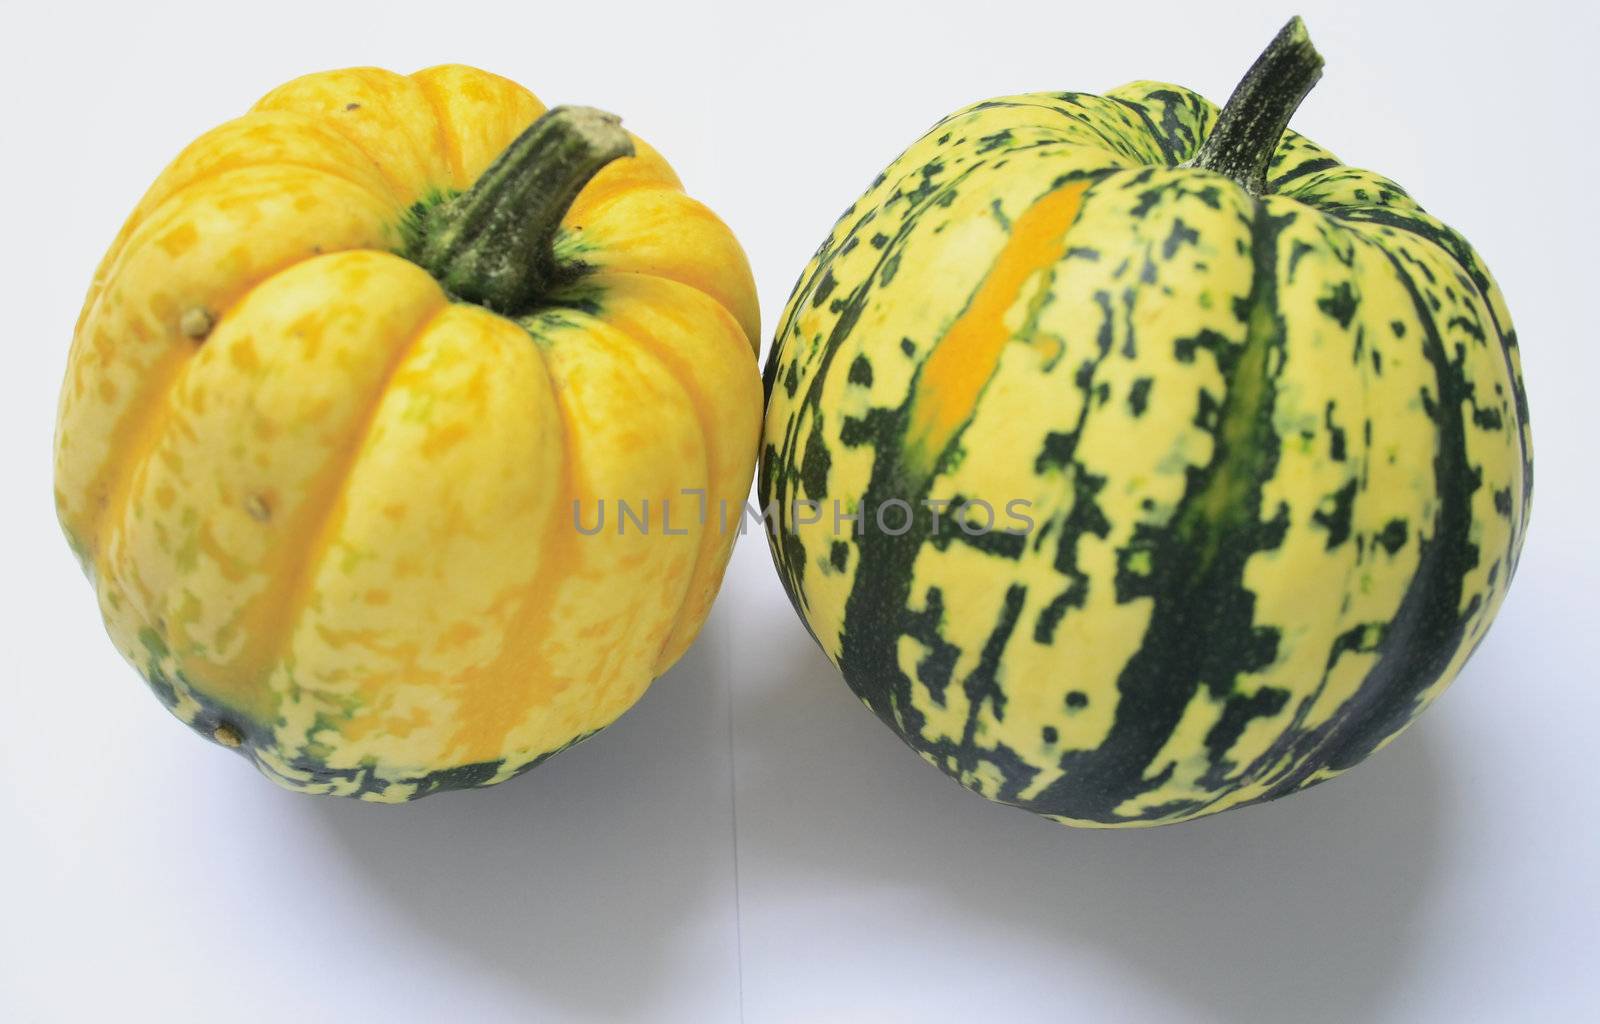 green and yellow ornamental squashes by leafy